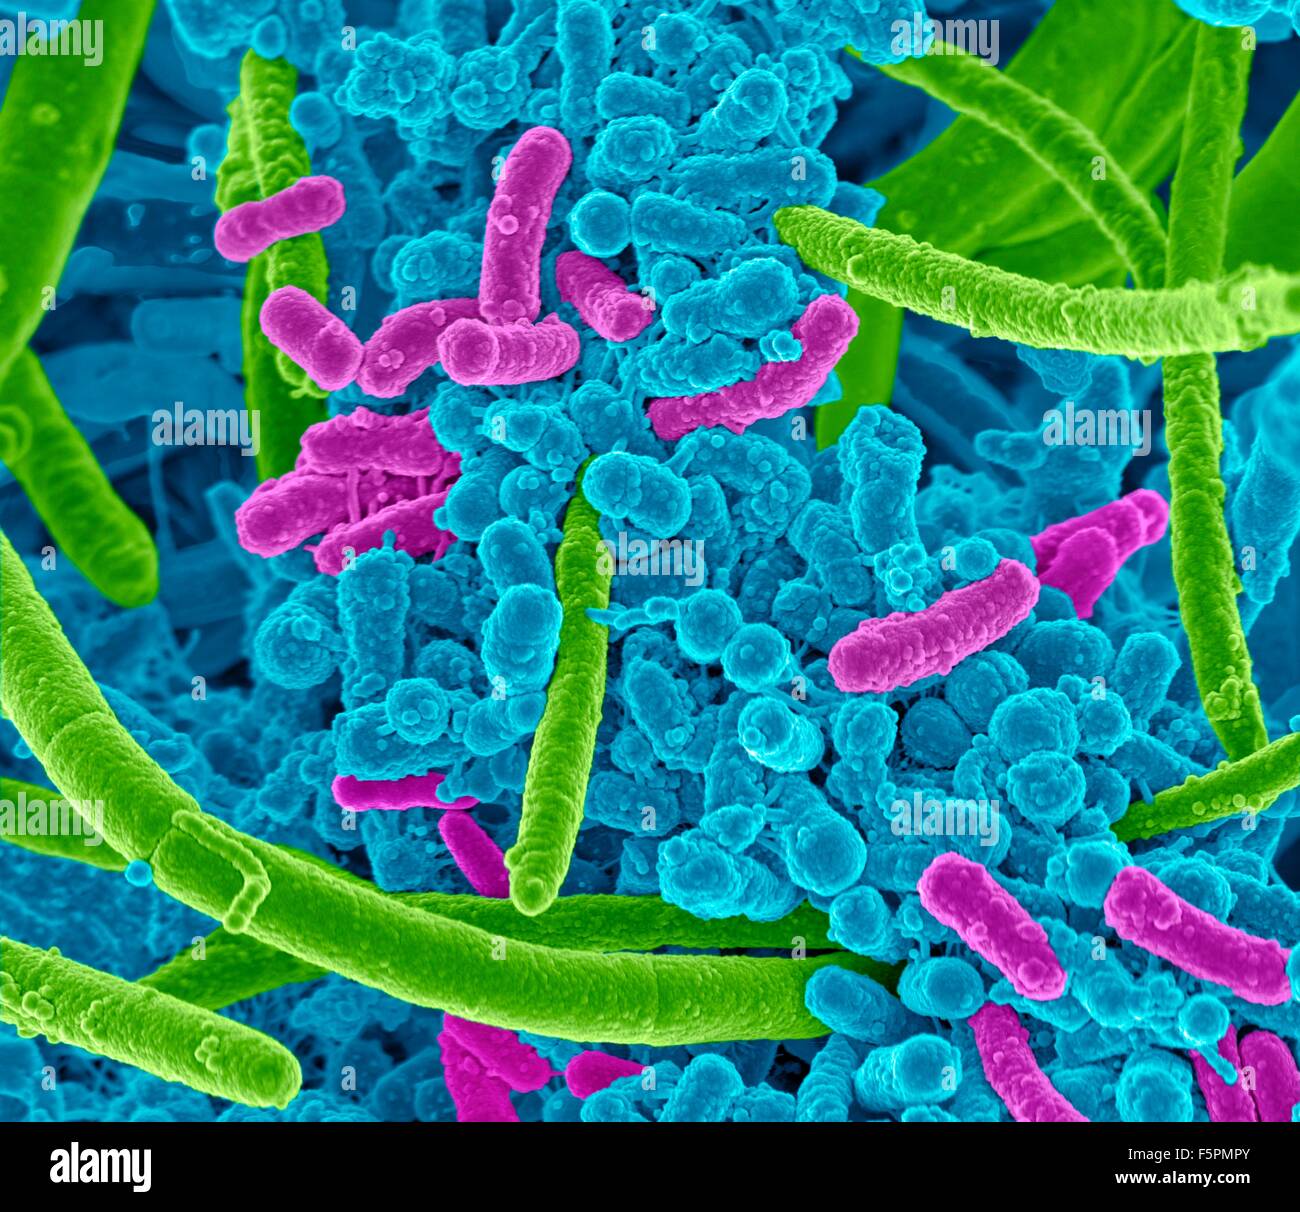 Oral bacteria. Coloured scanning electron micrograph (SEM) of mixed oral bacteria, consisting mostly of rod-shaped bacteria Stock Photo